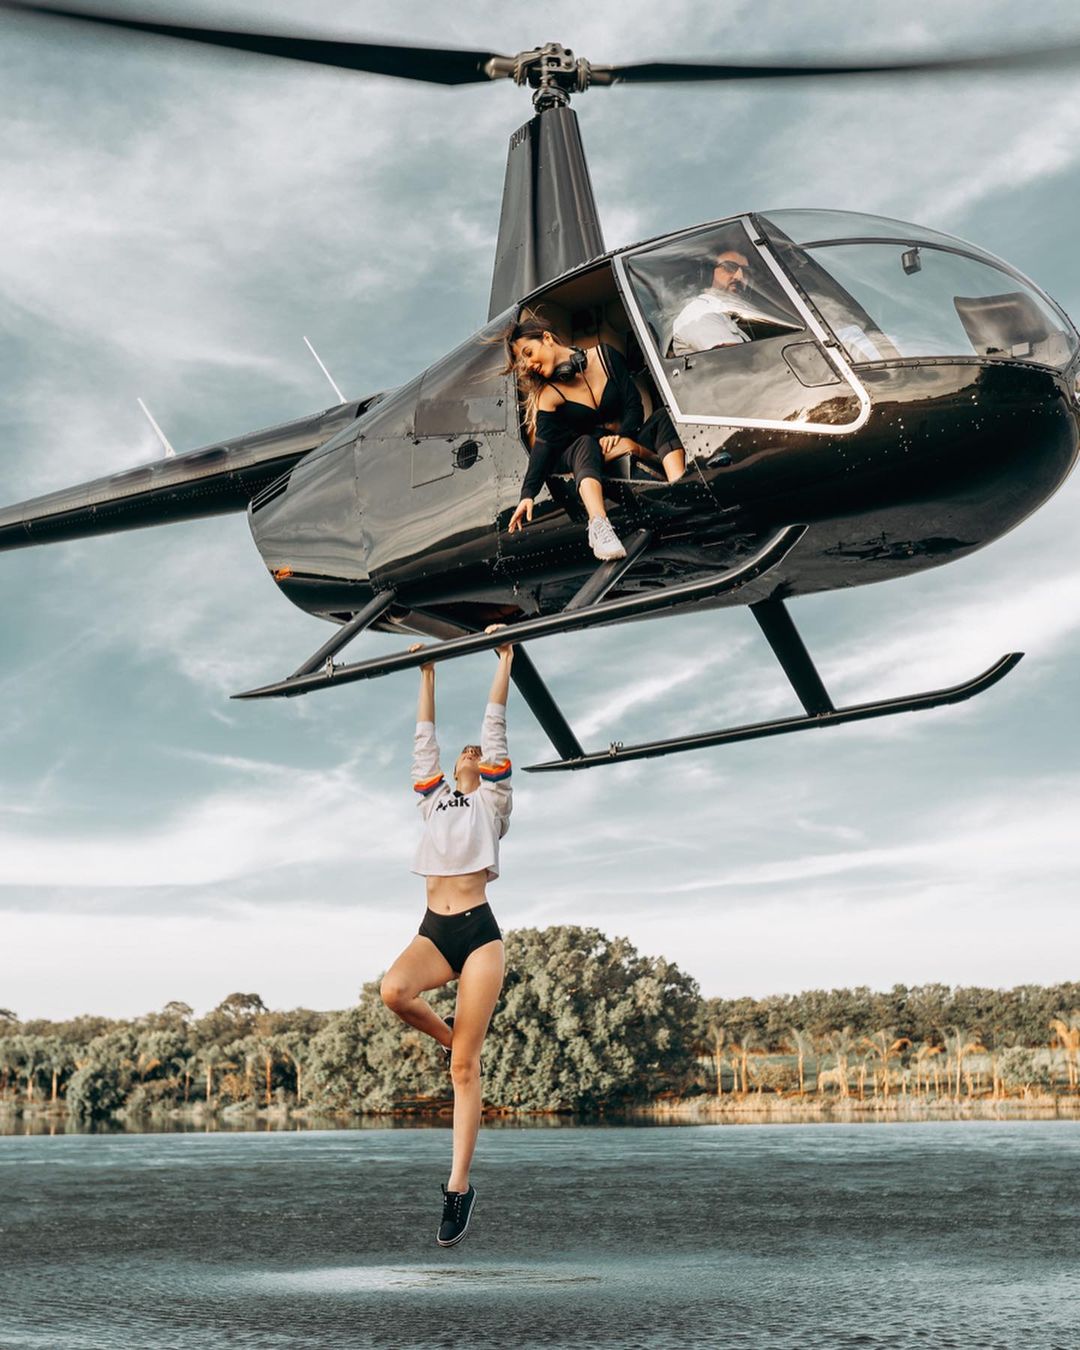 A woman is hanging from a helicopter in front of a lake.